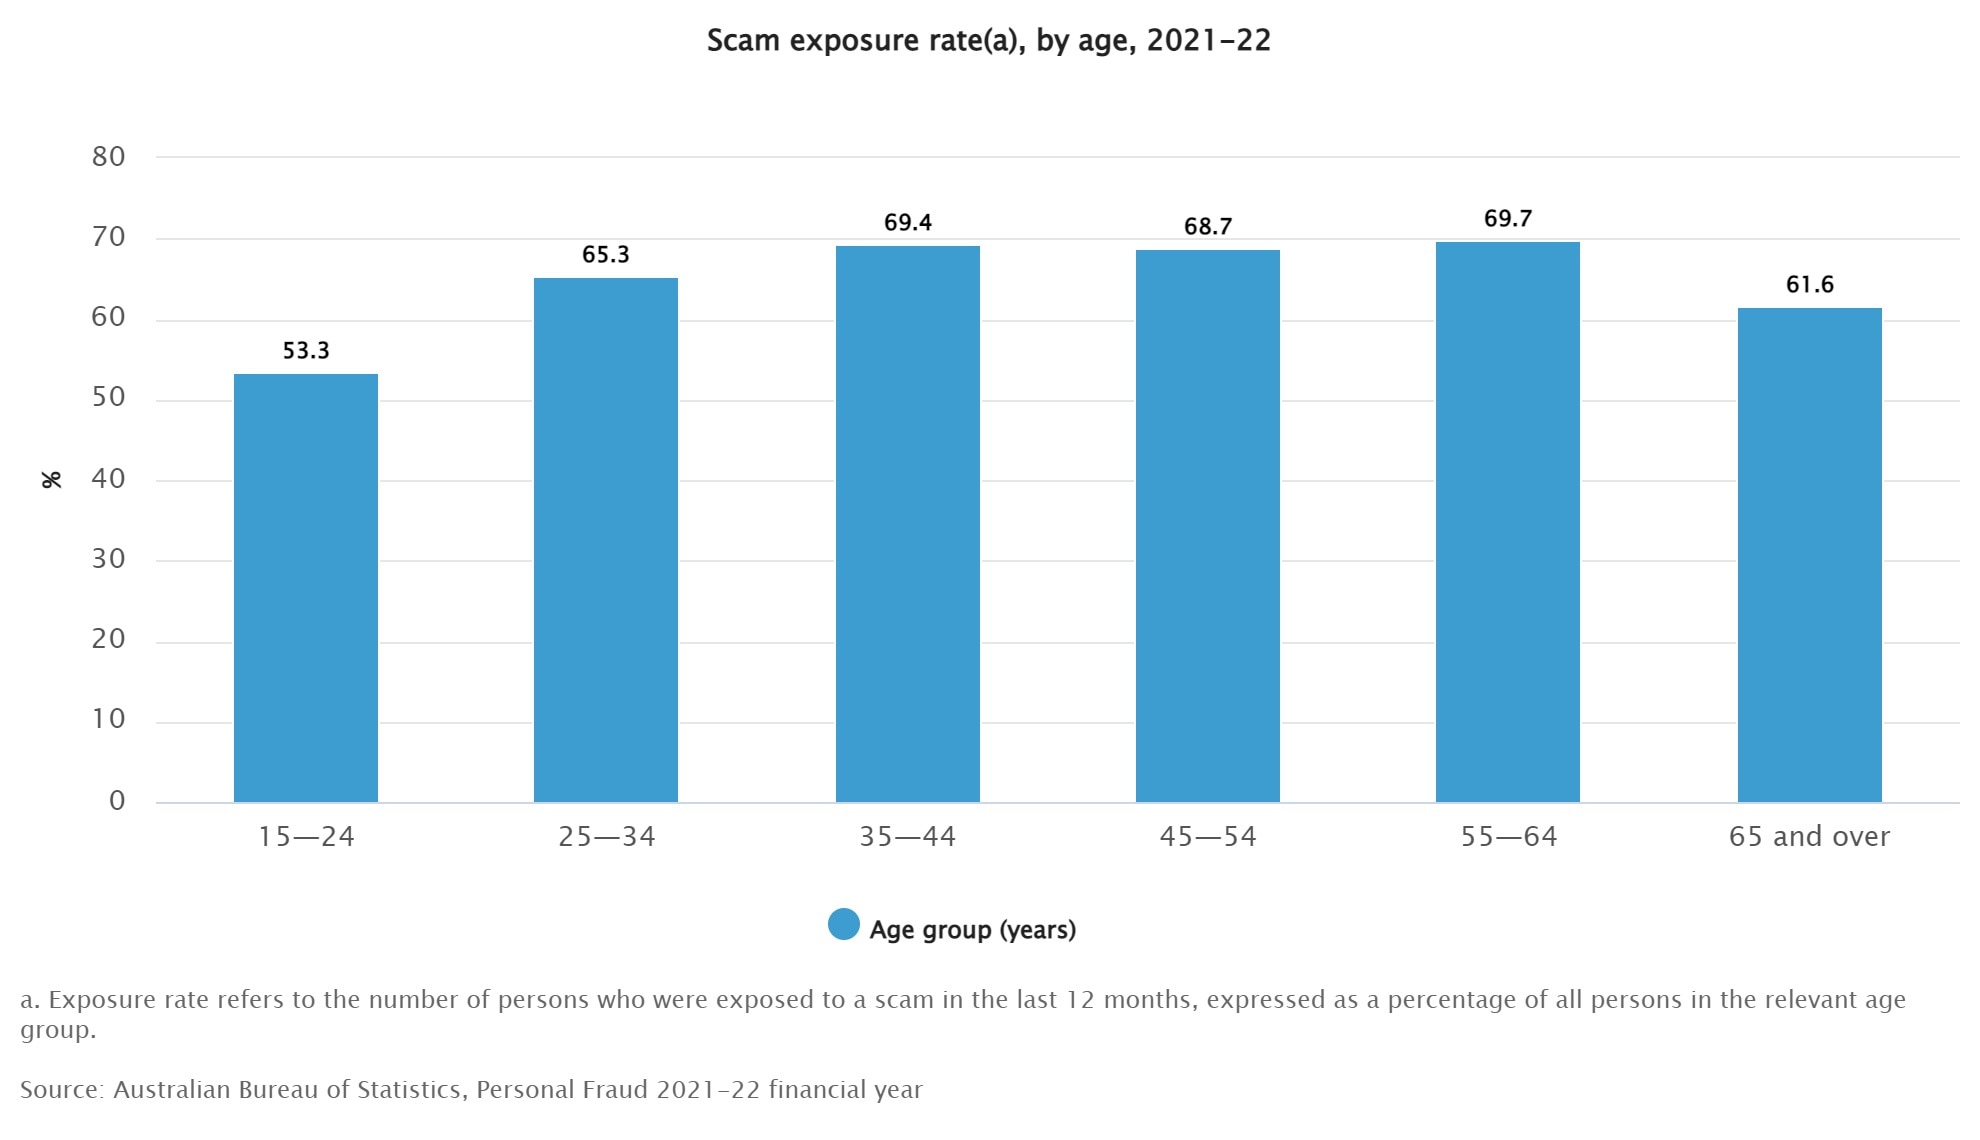 A graph showing people aged 35-44 and 55-64 being the most exposed to scams